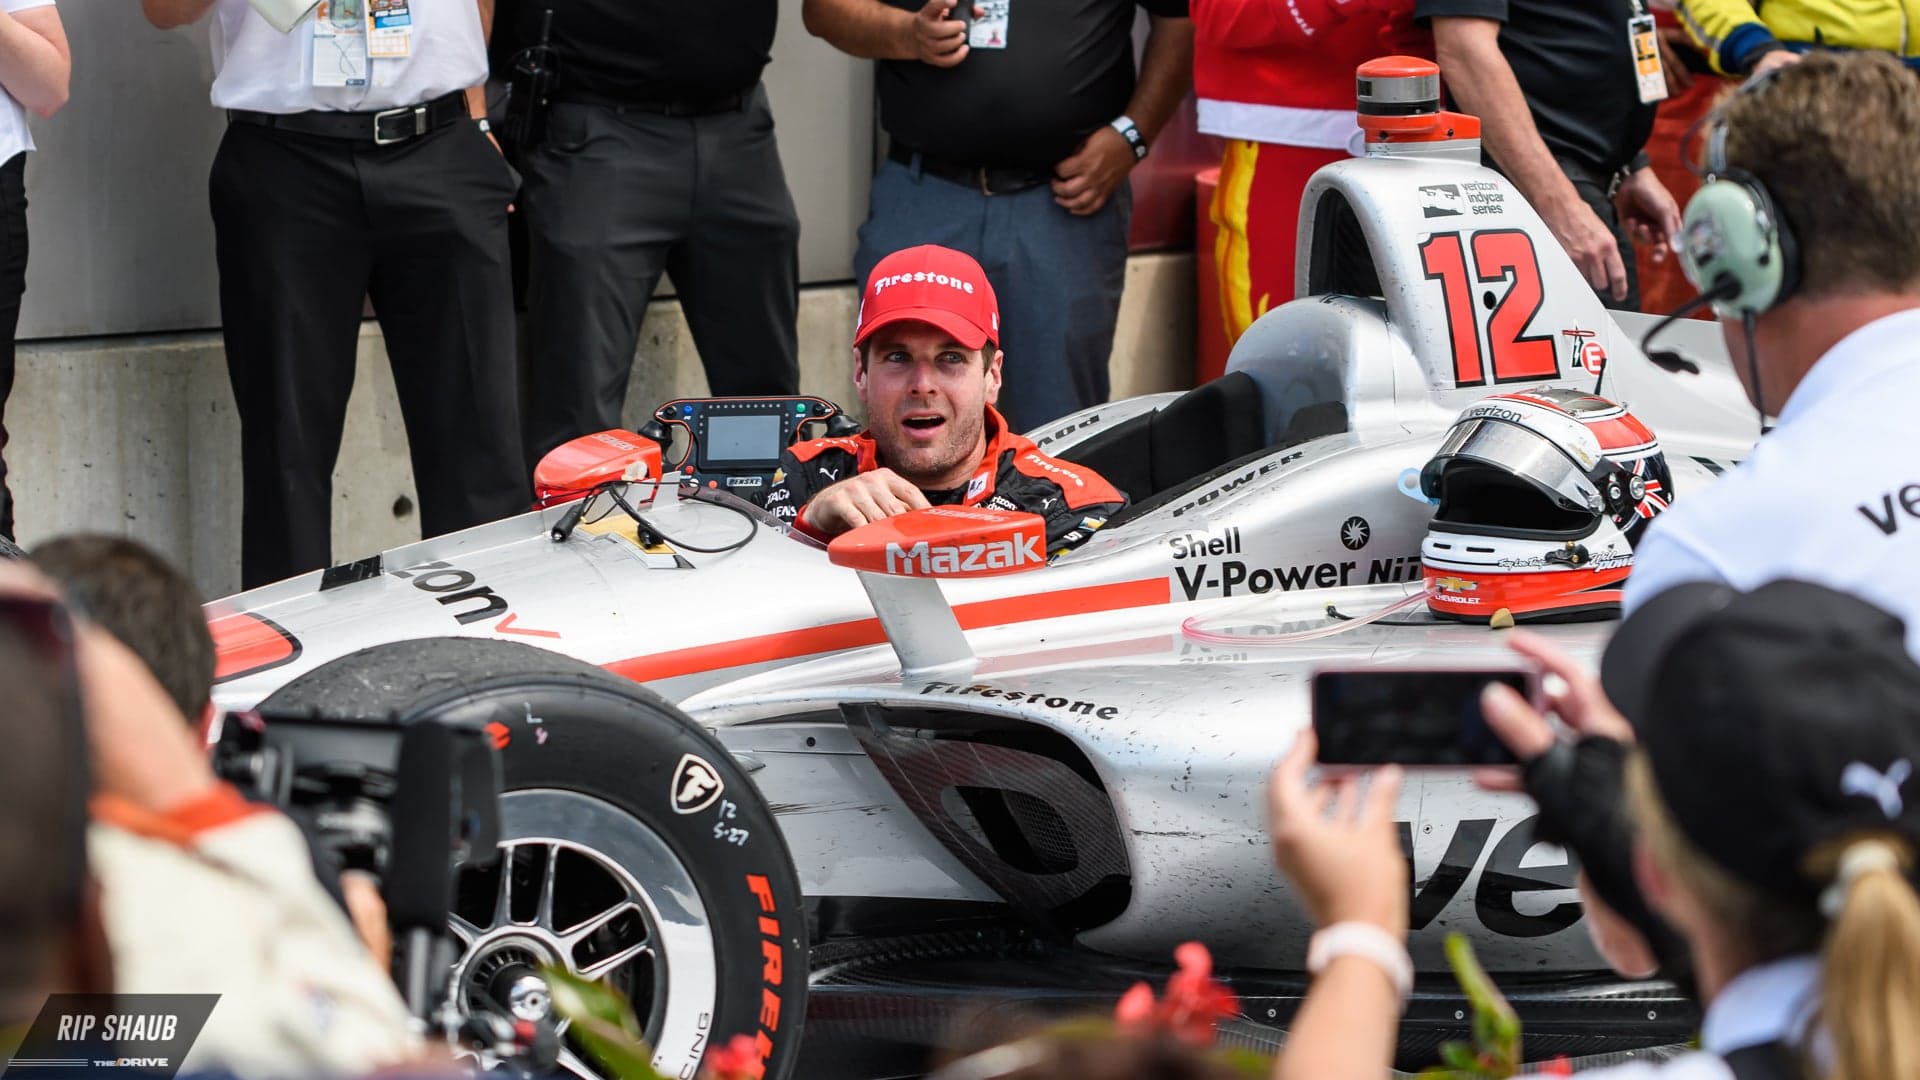 Indy 500 Racing Drivers All Took Home a Sizeable Purse on Sunday